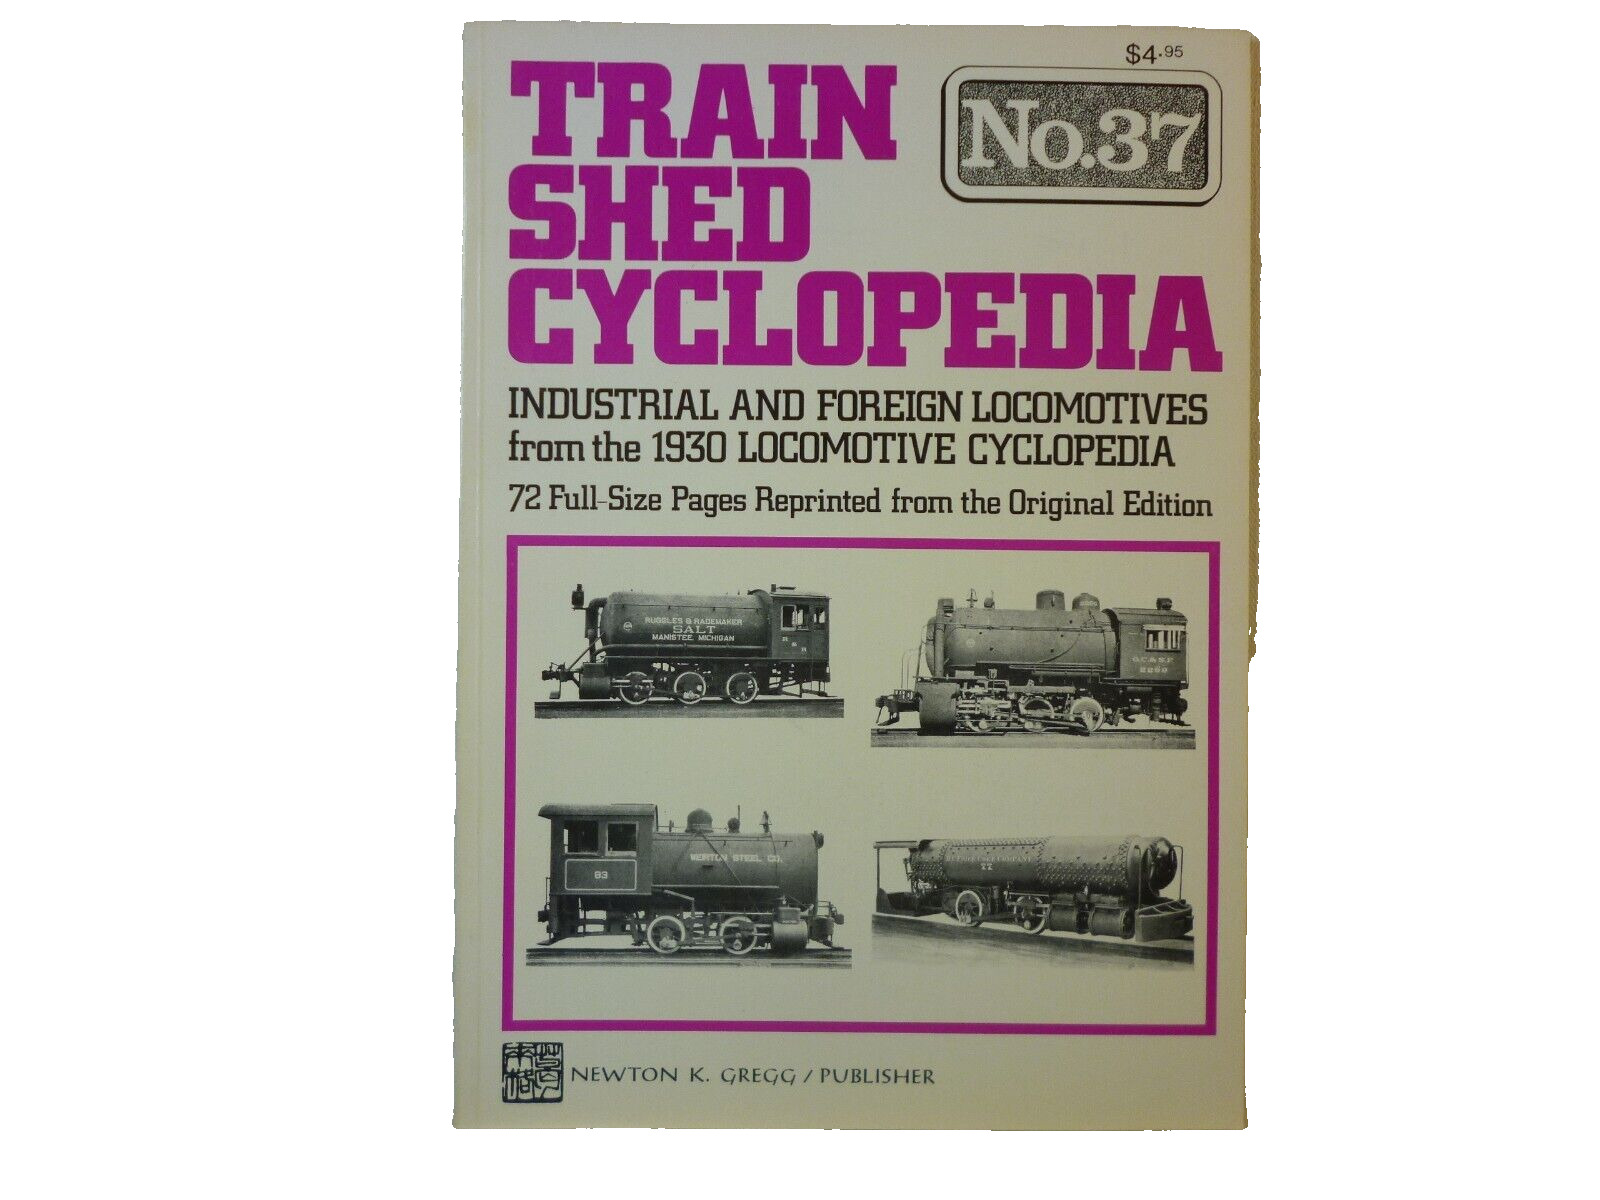 Train Shed Cyclopedia #37 Industrial Foreign Locomotive 1930. 17881A